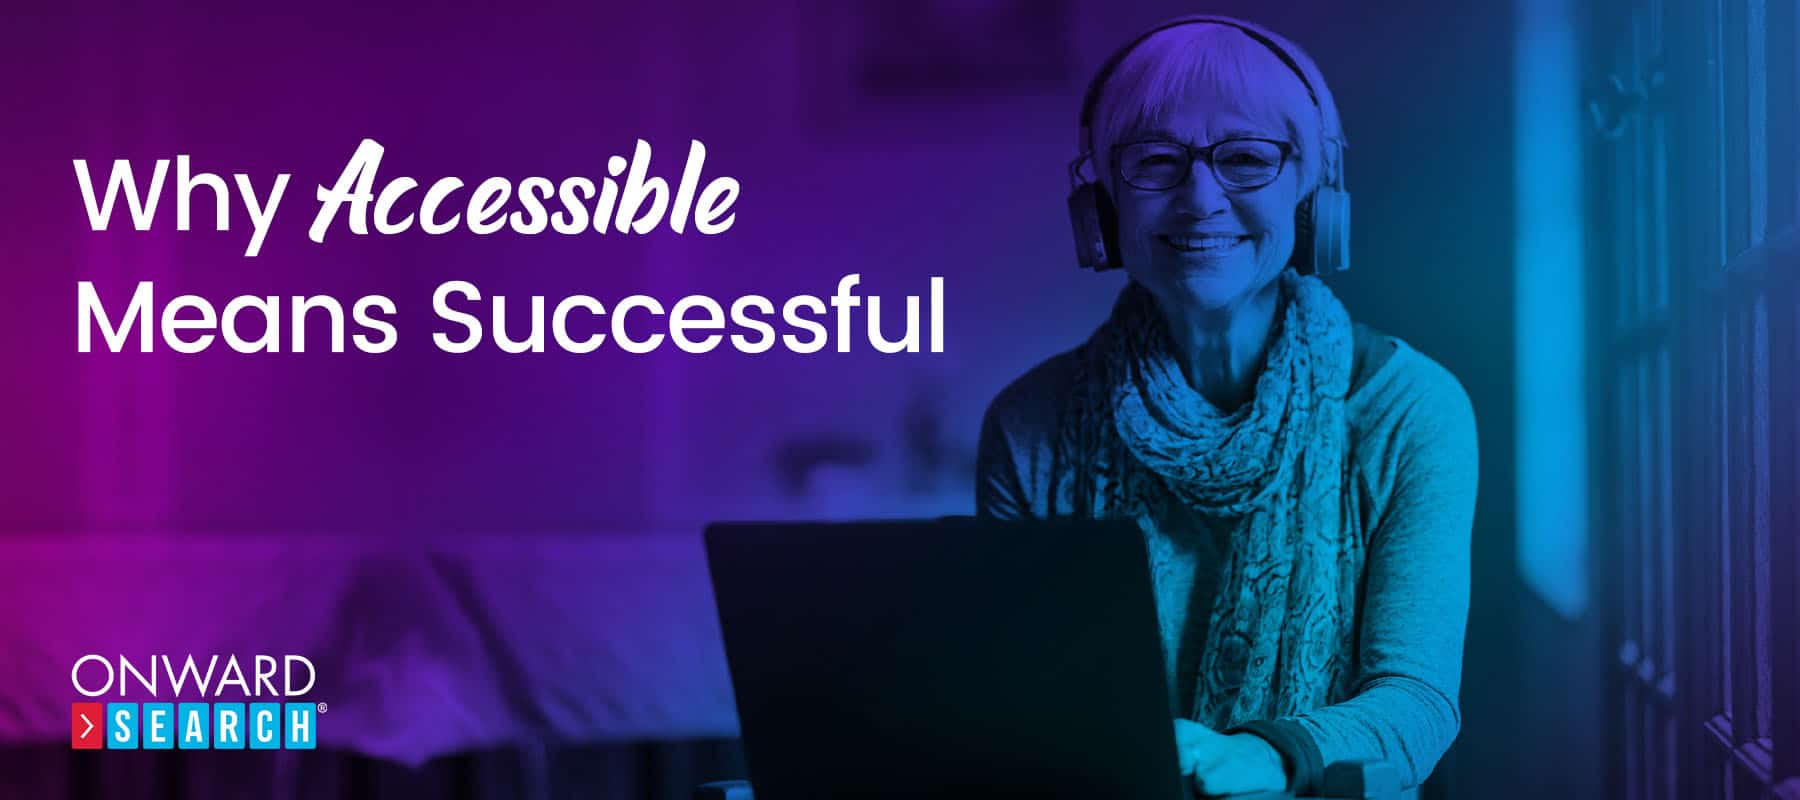 Why Accessible Means Successful